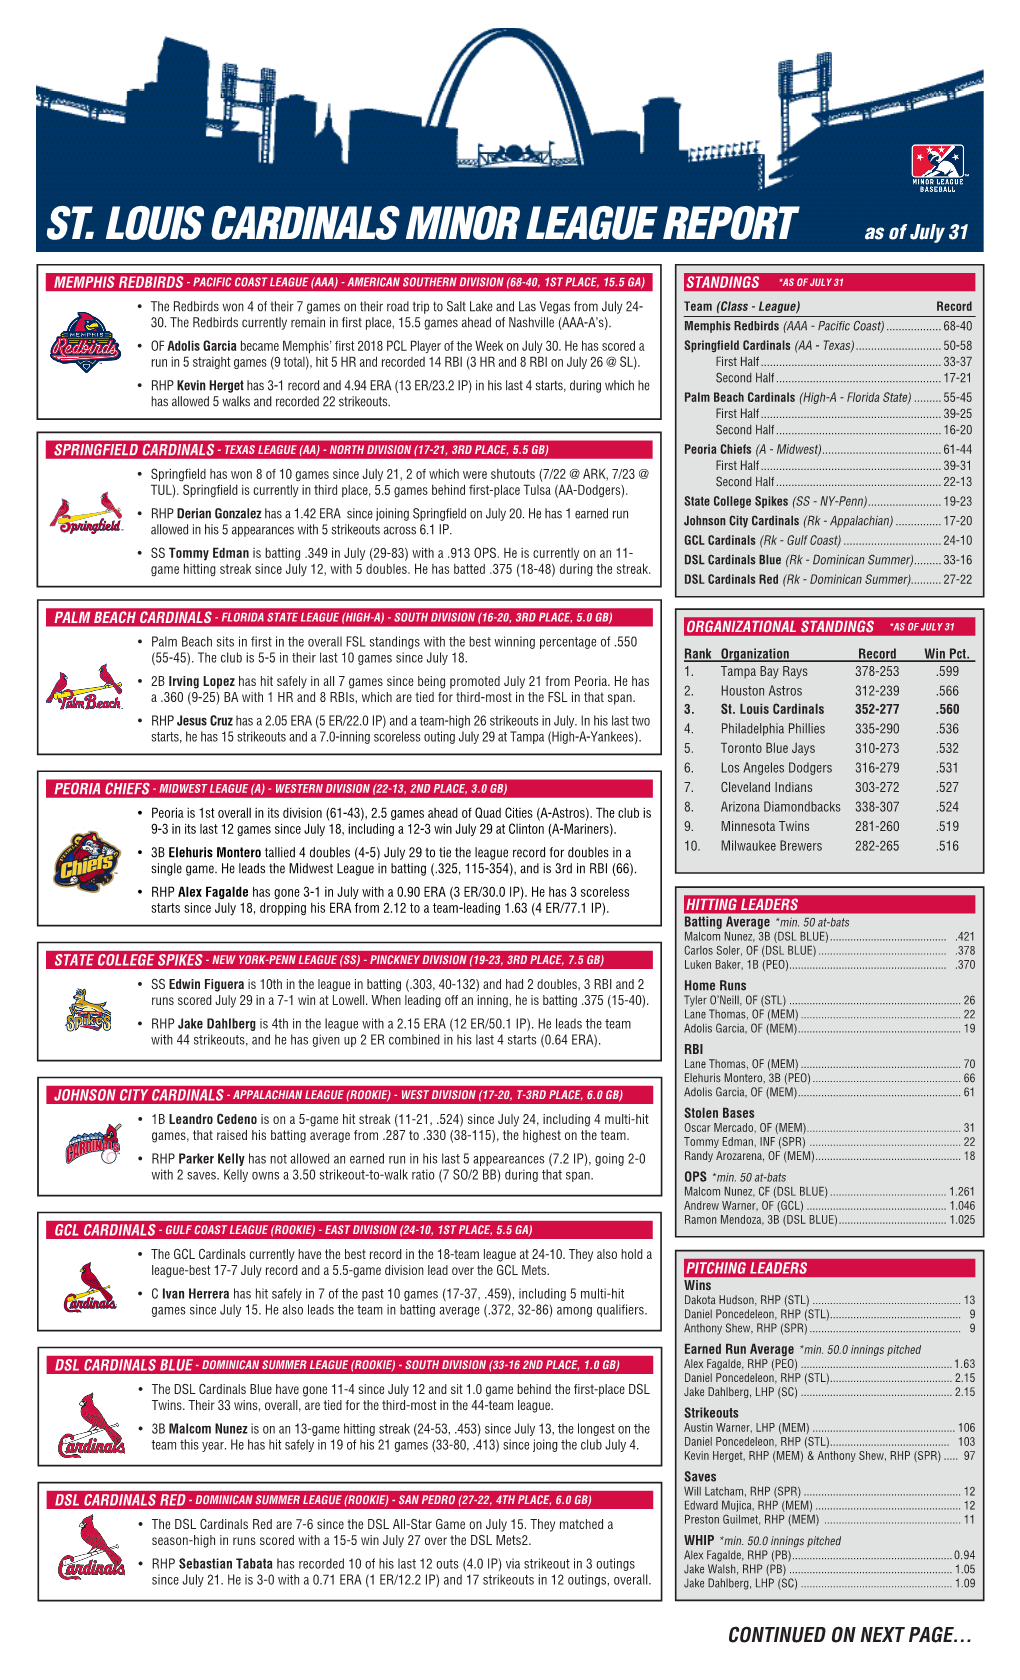 ST. LOUIS CARDINALS MINOR LEAGUE REPORT As of July 31